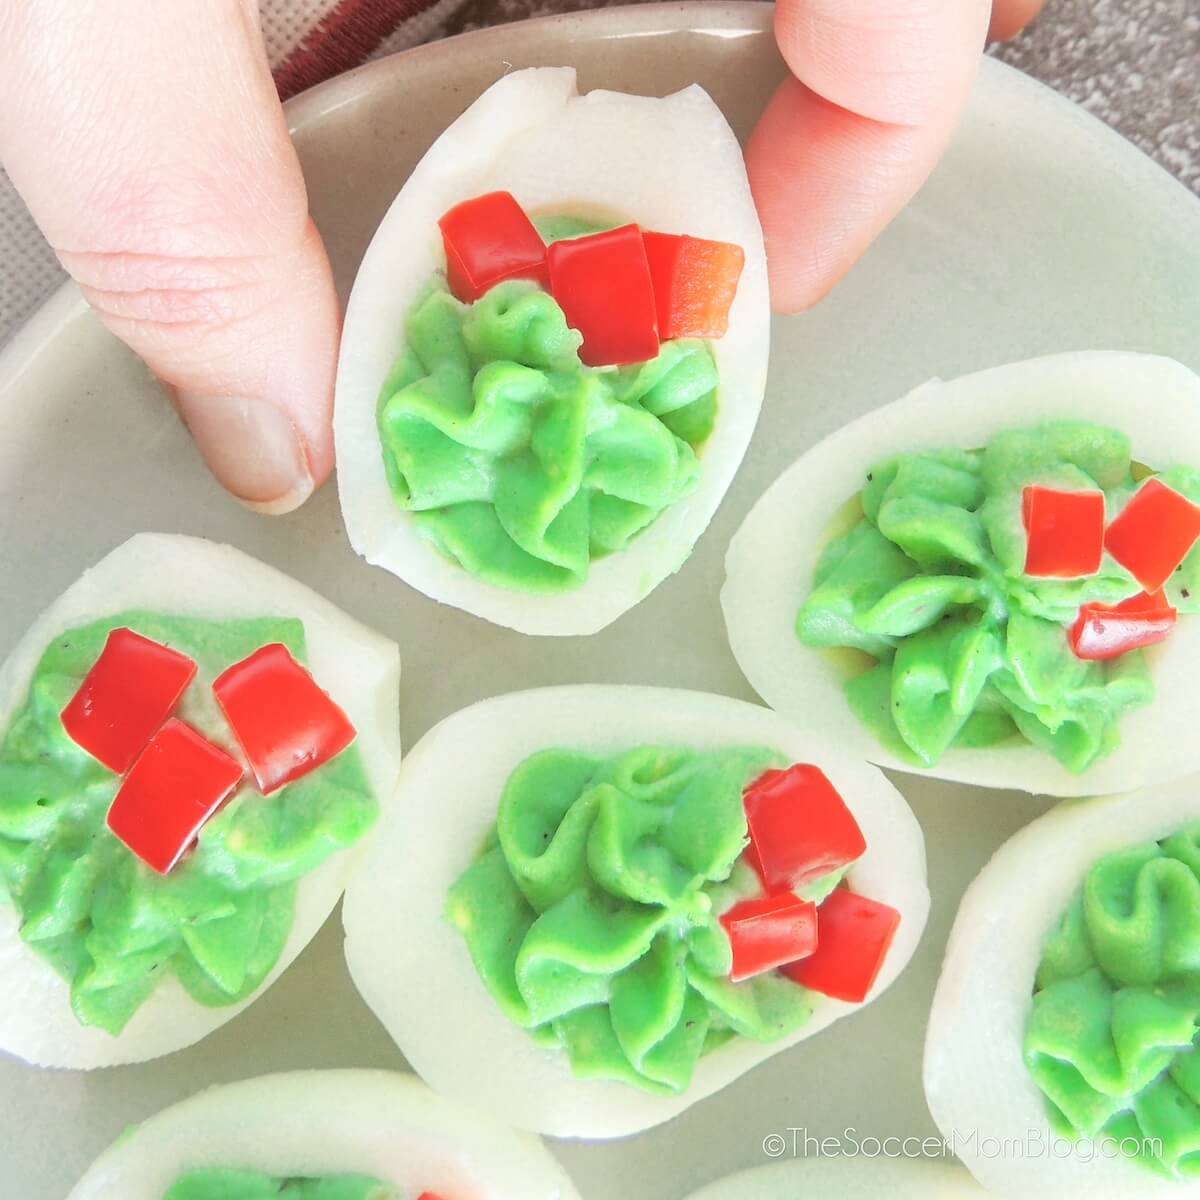 close up of a hand picking up a deviled egg that is red and green to look like a Christmas wreath.